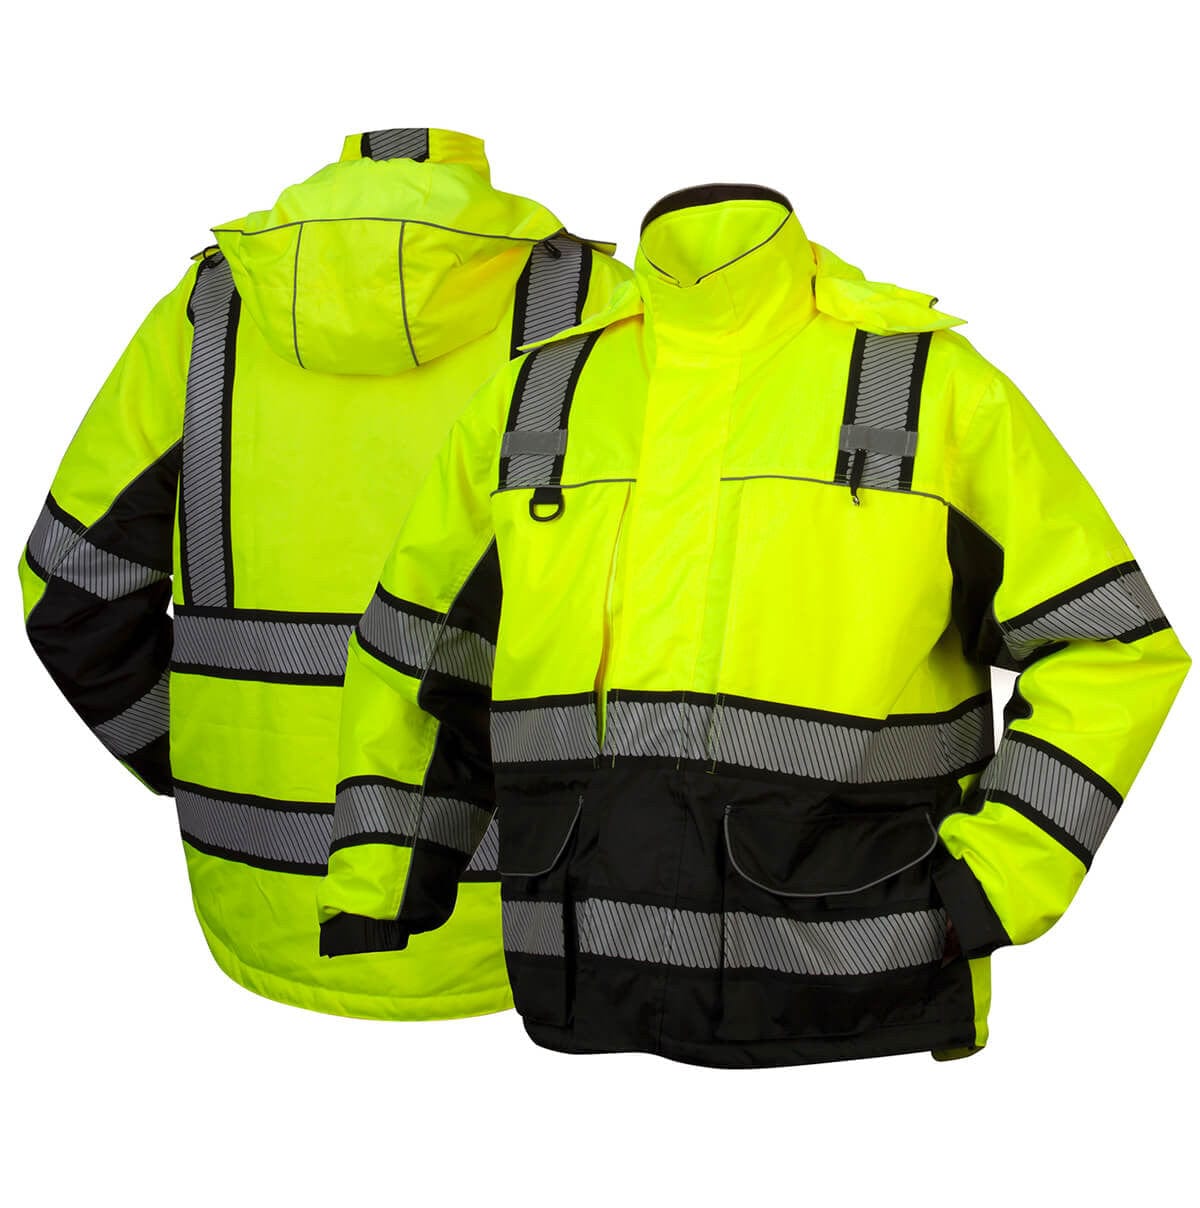 Pyramex RPB3610 Type R Class 3 Waterproof Multi-Layer Parka Hi-Vis Lime - Front/Back